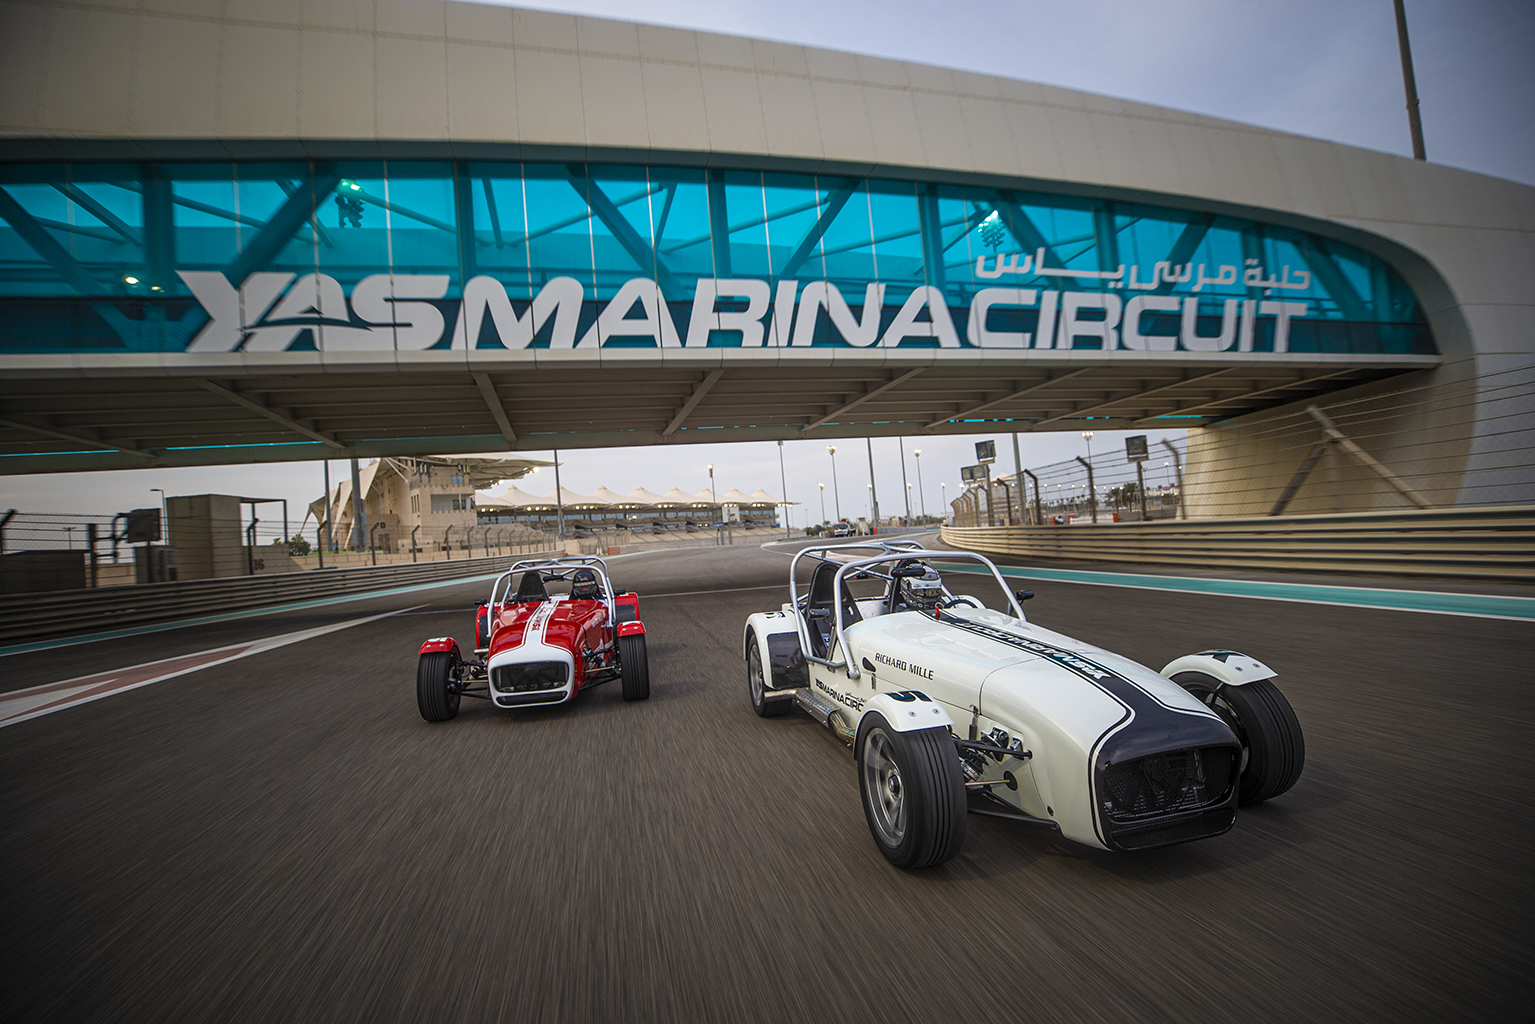 Be Entertained, Get Active And Enjoy Family Time During Ramadan At Yas Marina Circuit